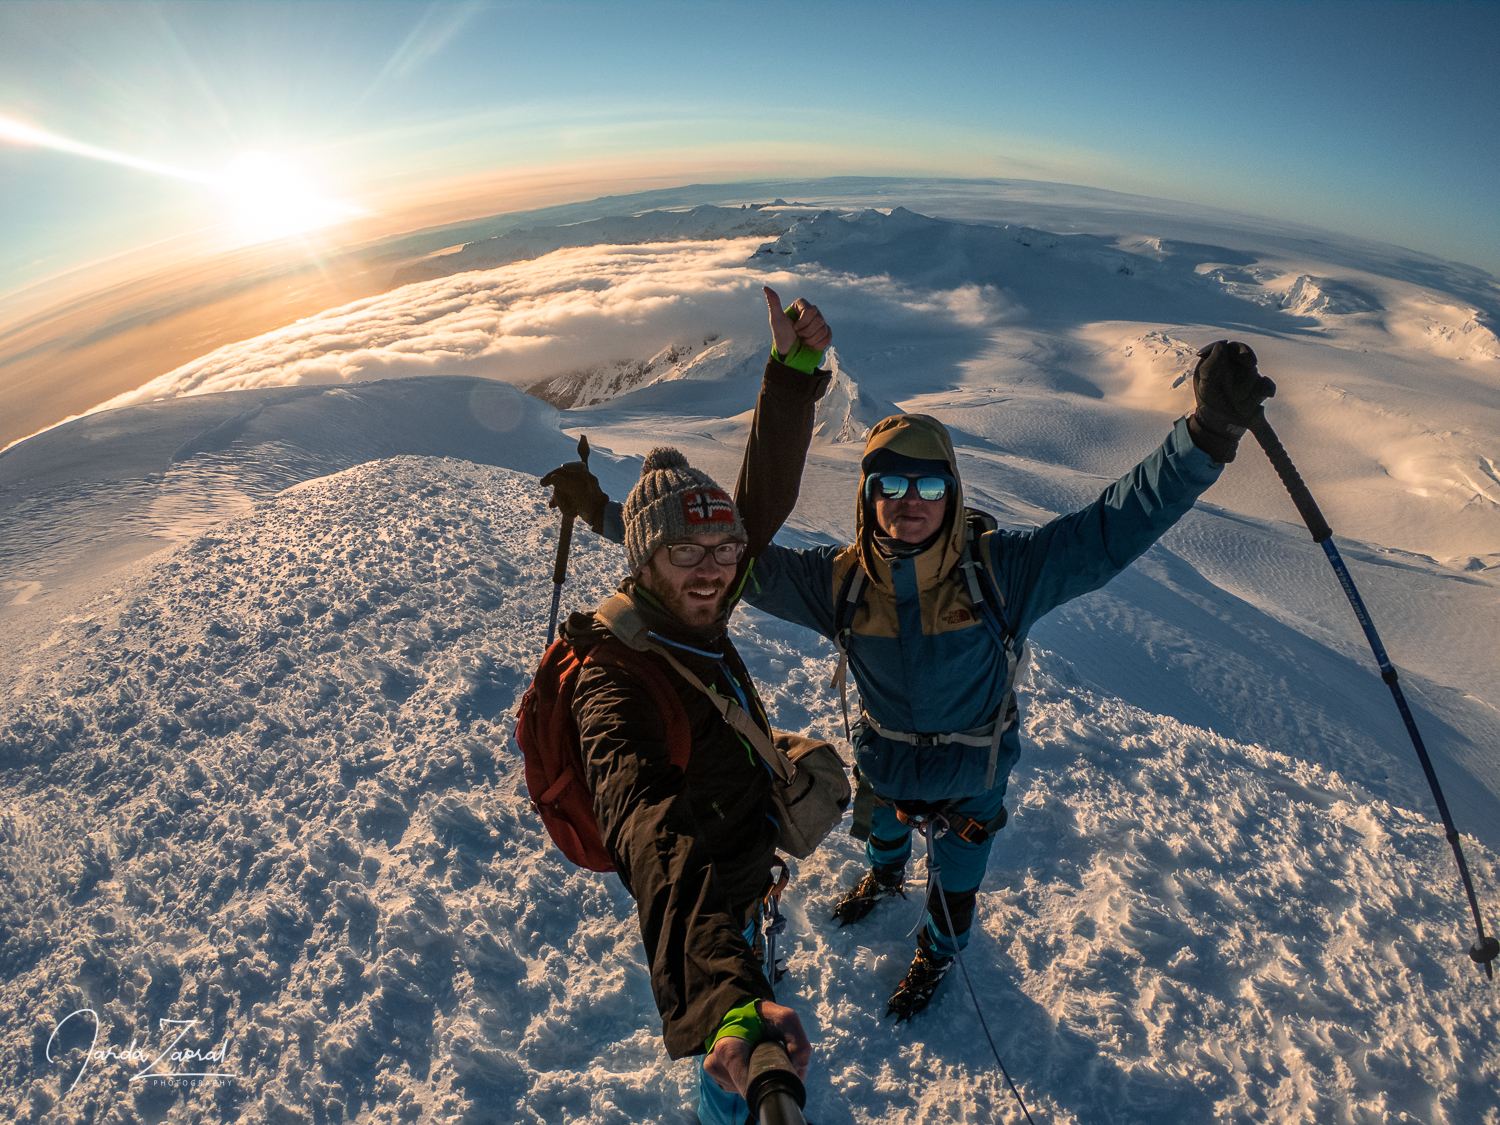 Selfie from the top of Iceland's highest mountain